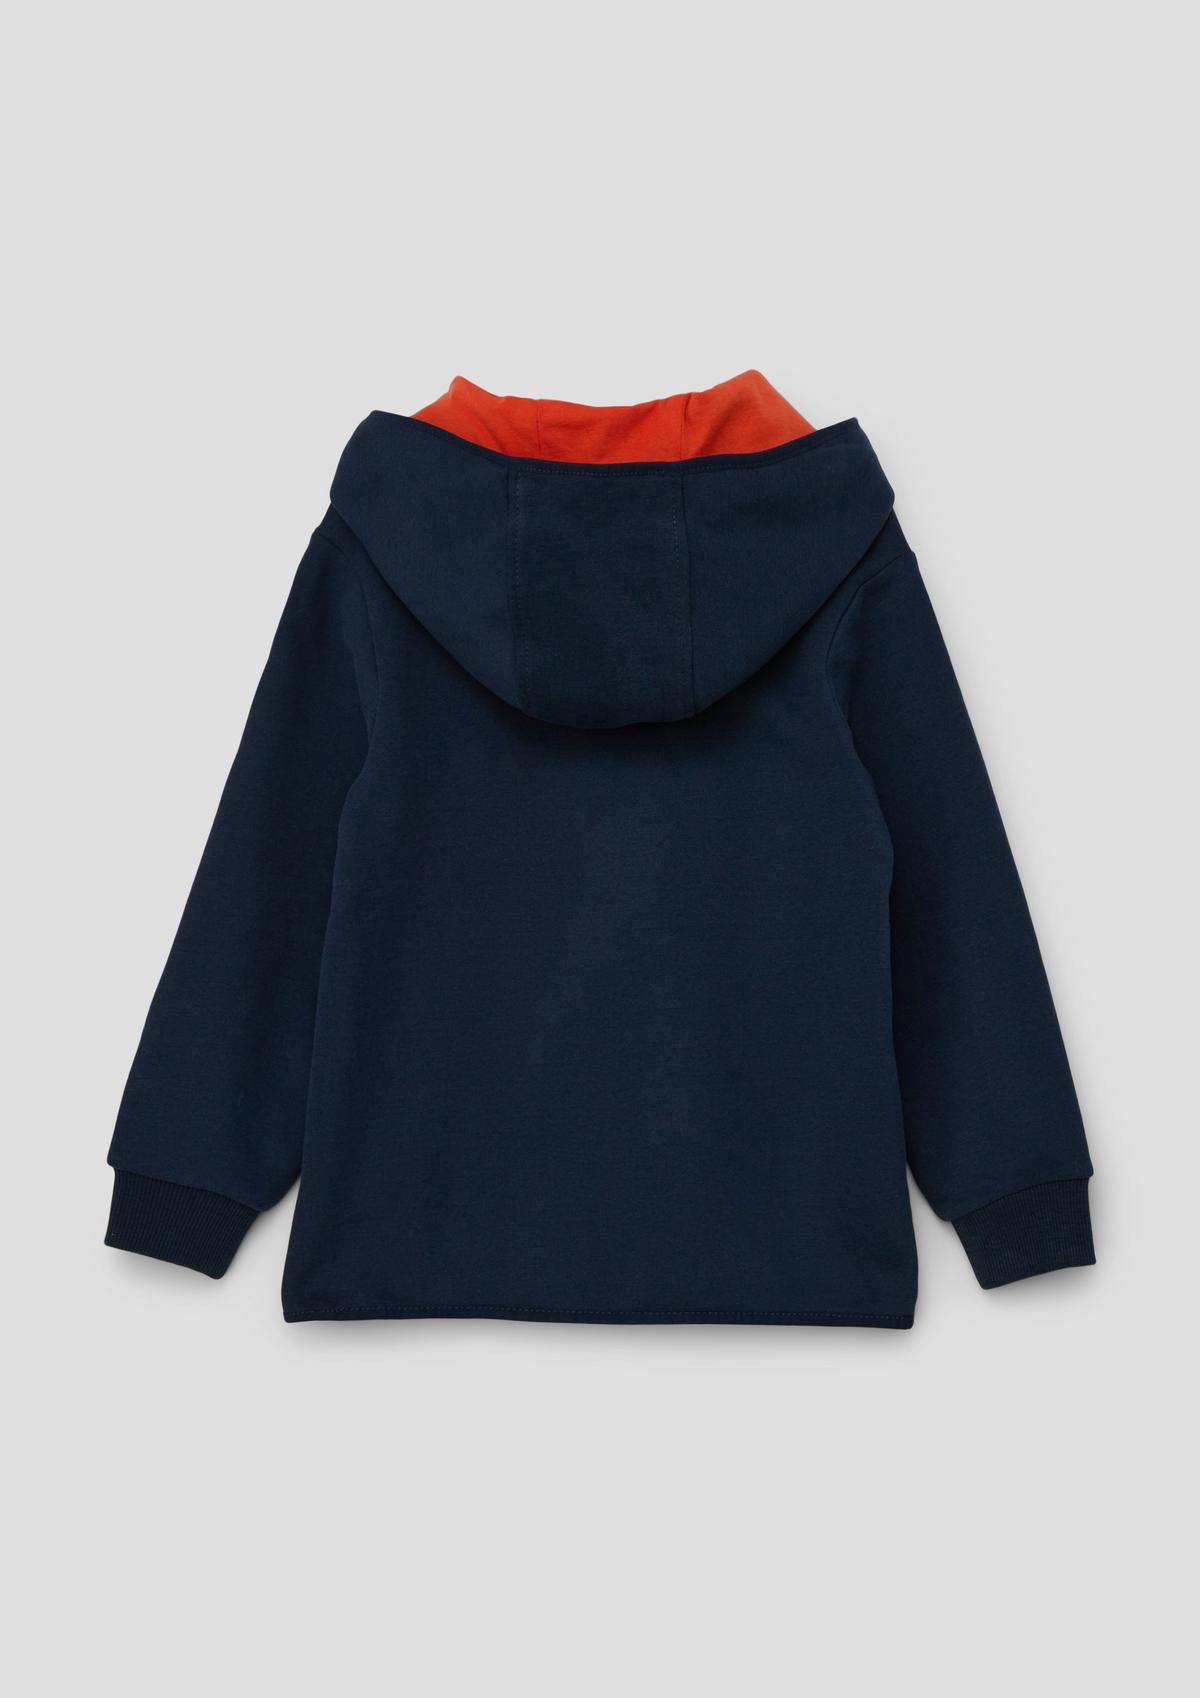 s.Oliver Hooded sweatshirt with a front print